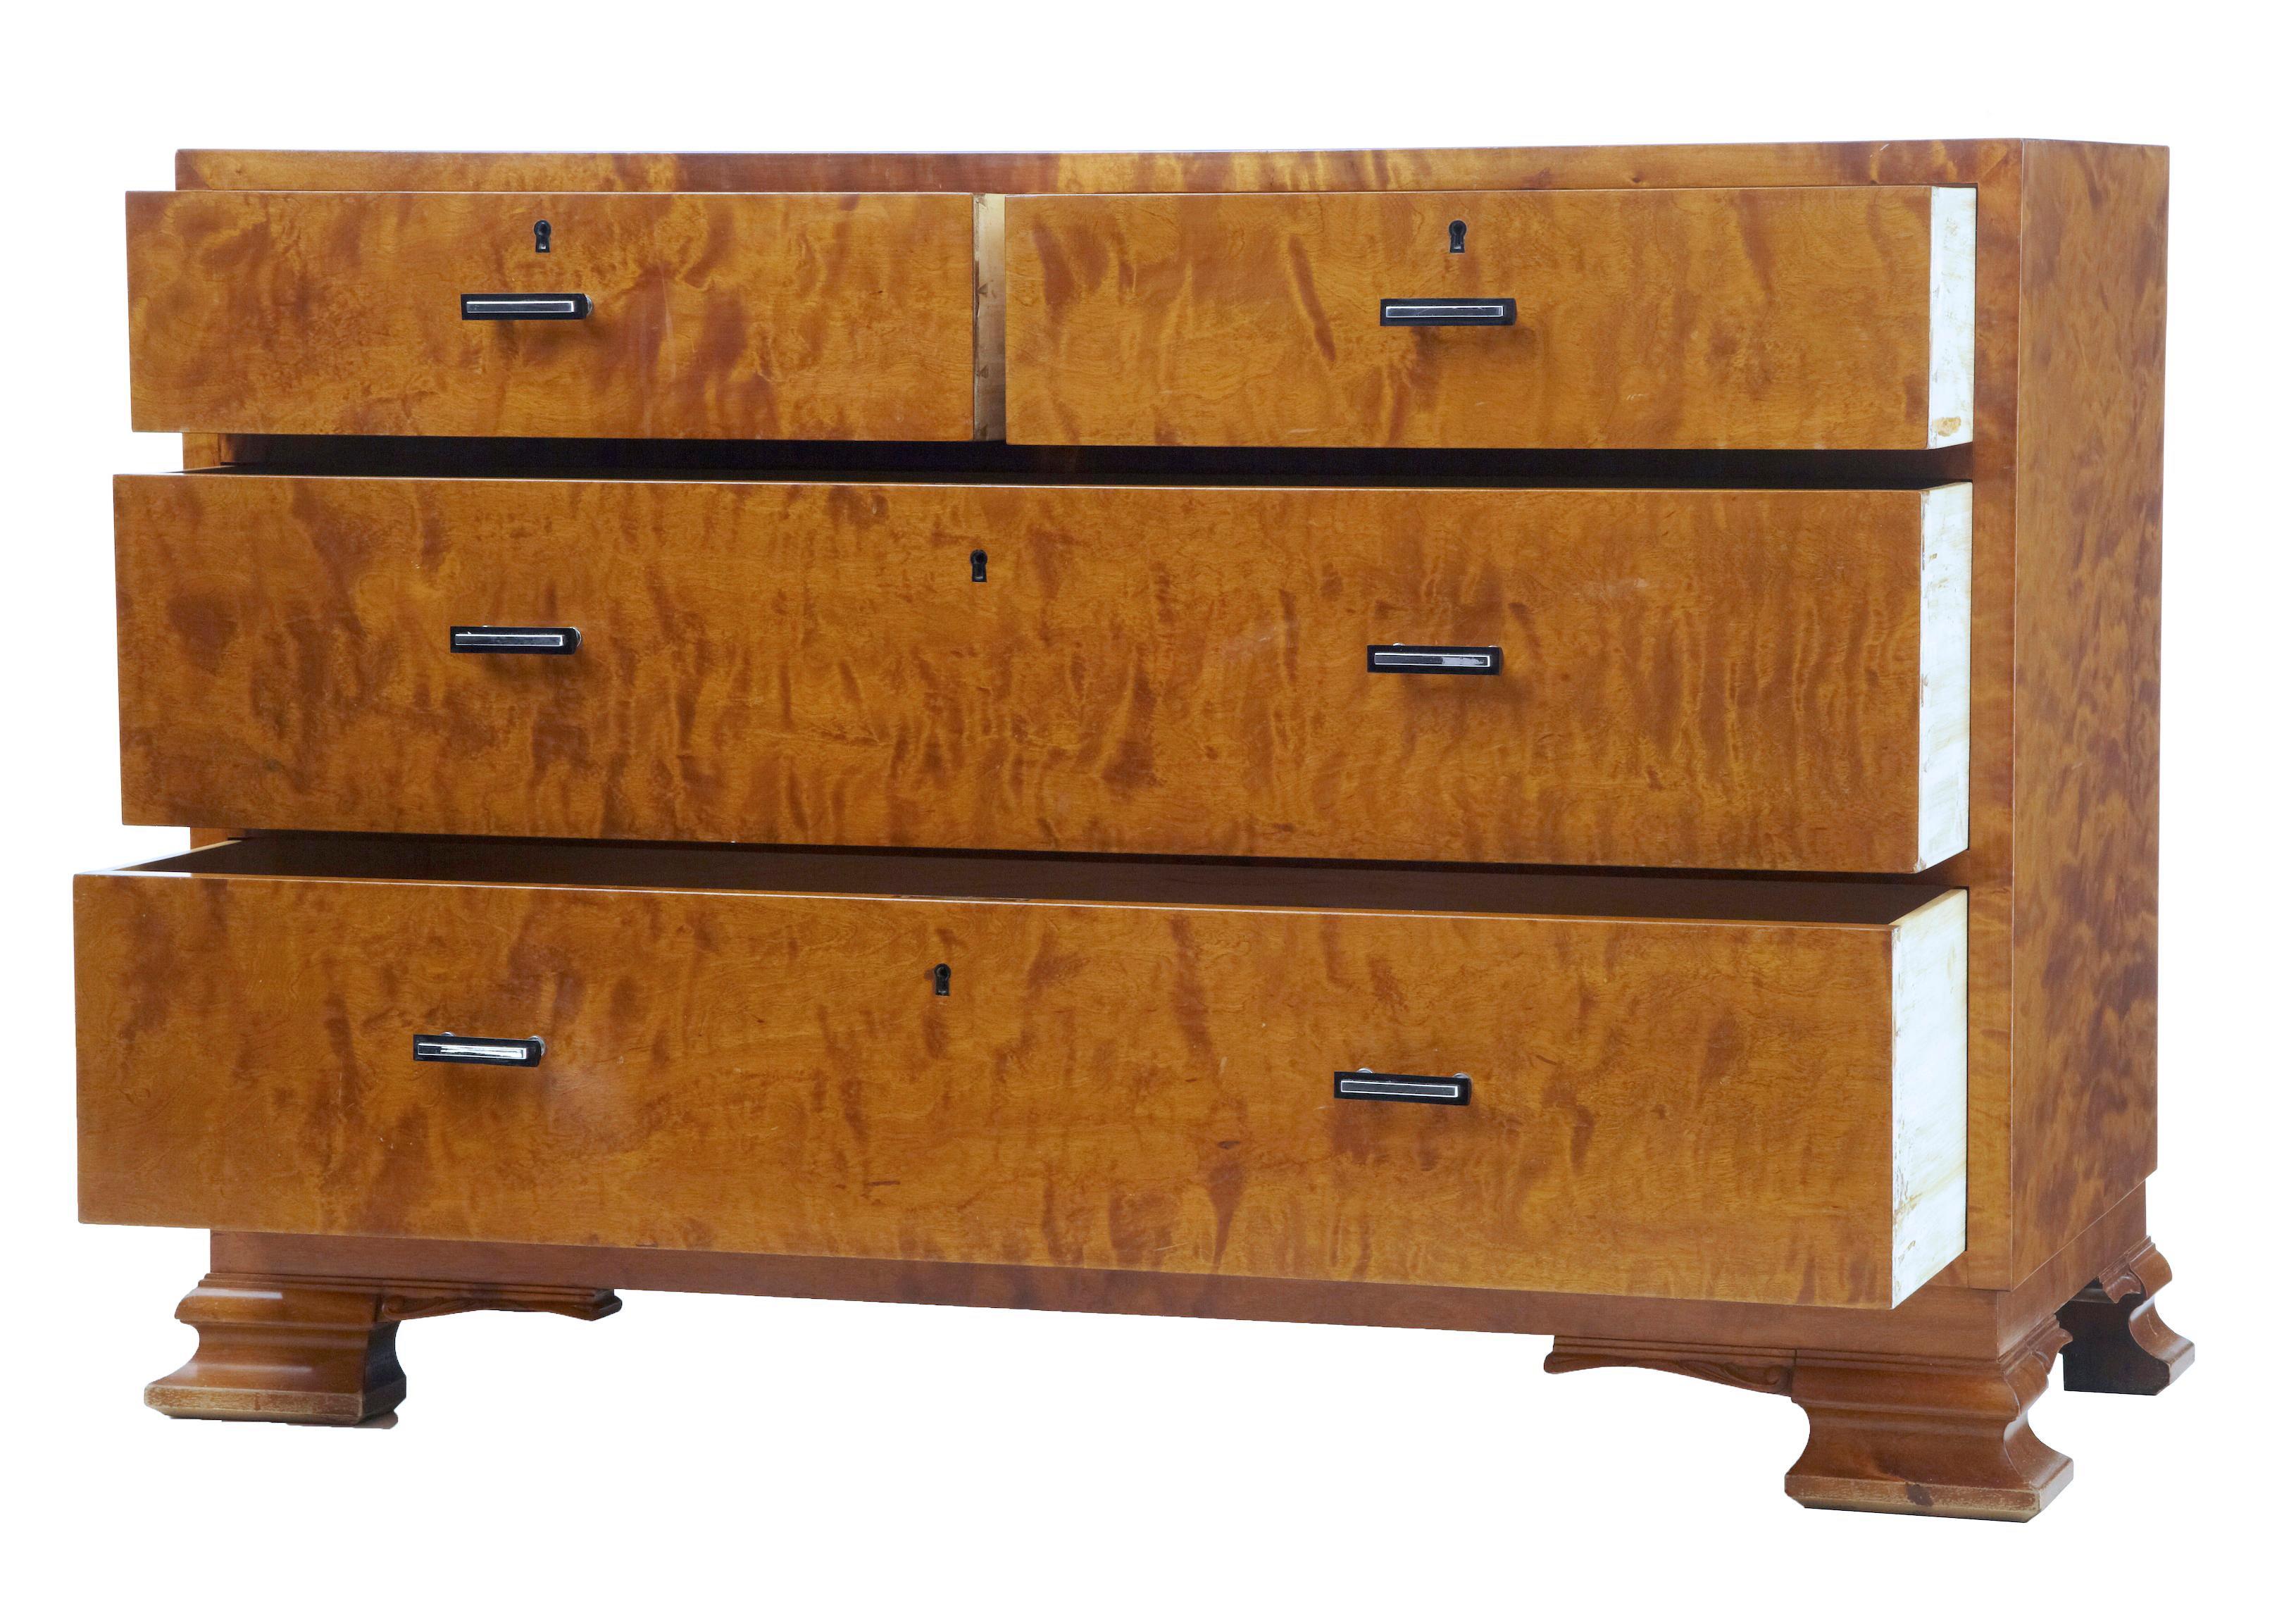 Mid-20th century Scandinavian birch chest of drawers circa 1950.

Good quality Art Deco inspired chest of drawers from Sweden. Fitted with 4 graduating drawers fitted with bakelite and steel handles, 2 over 2 drawer formation. 
Rich color and